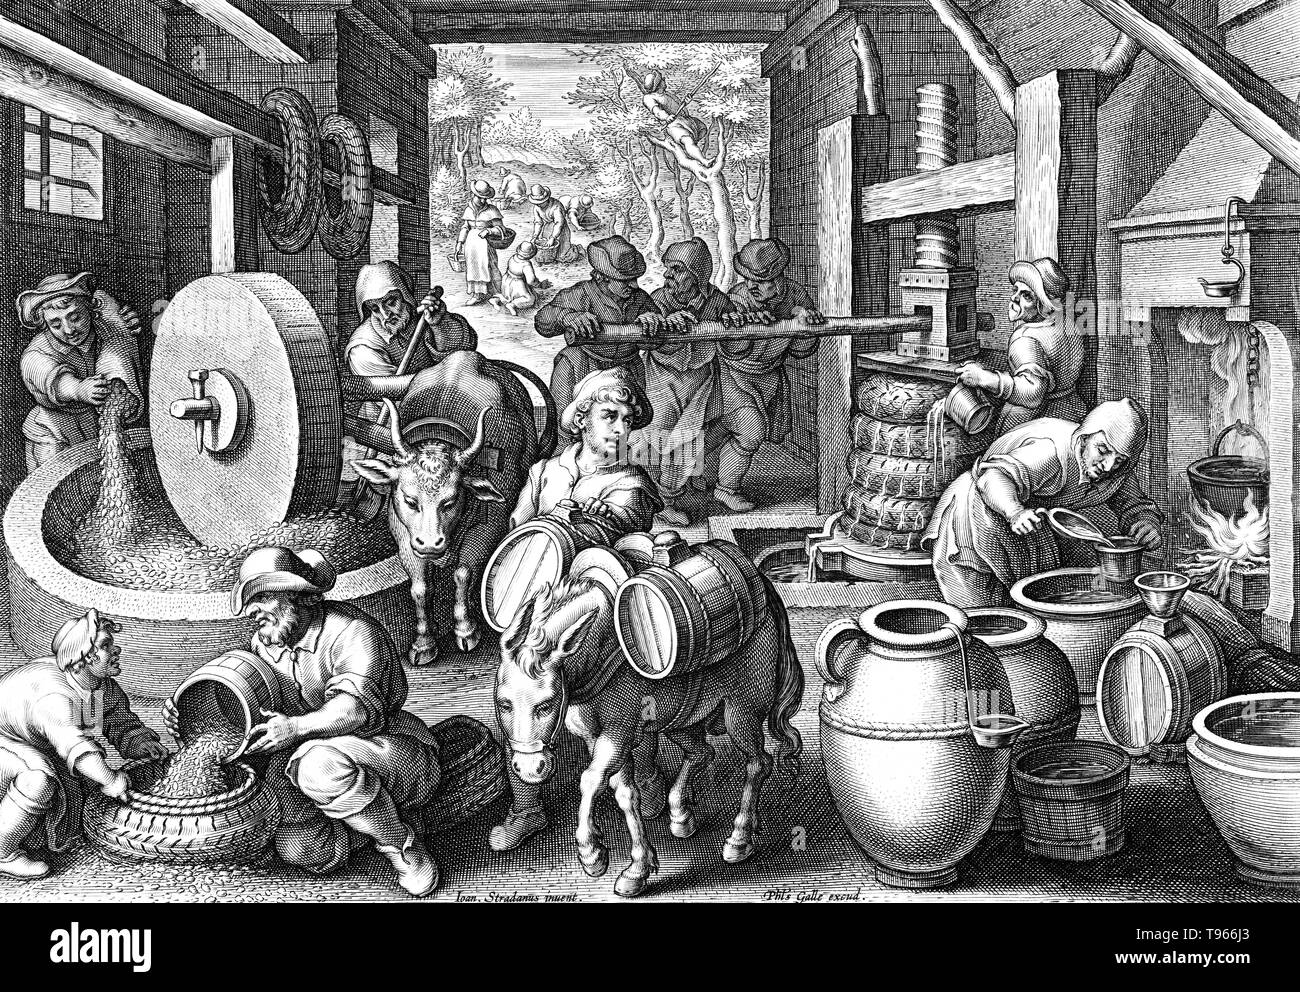 PLATE 12. The Invention of the Olive Oil Press. Twelfth plate from a print series entitled Nova Reperta (New Inventions of Modern Times) consisting of a title page and 19 plates, engraved by Jan Collaert I, after Jan van der Straet, called Stradanus, and published by Philips Galle. Illustration of workers at the olive oil press. In the background men gather olives from the trees outside. Stock Photo